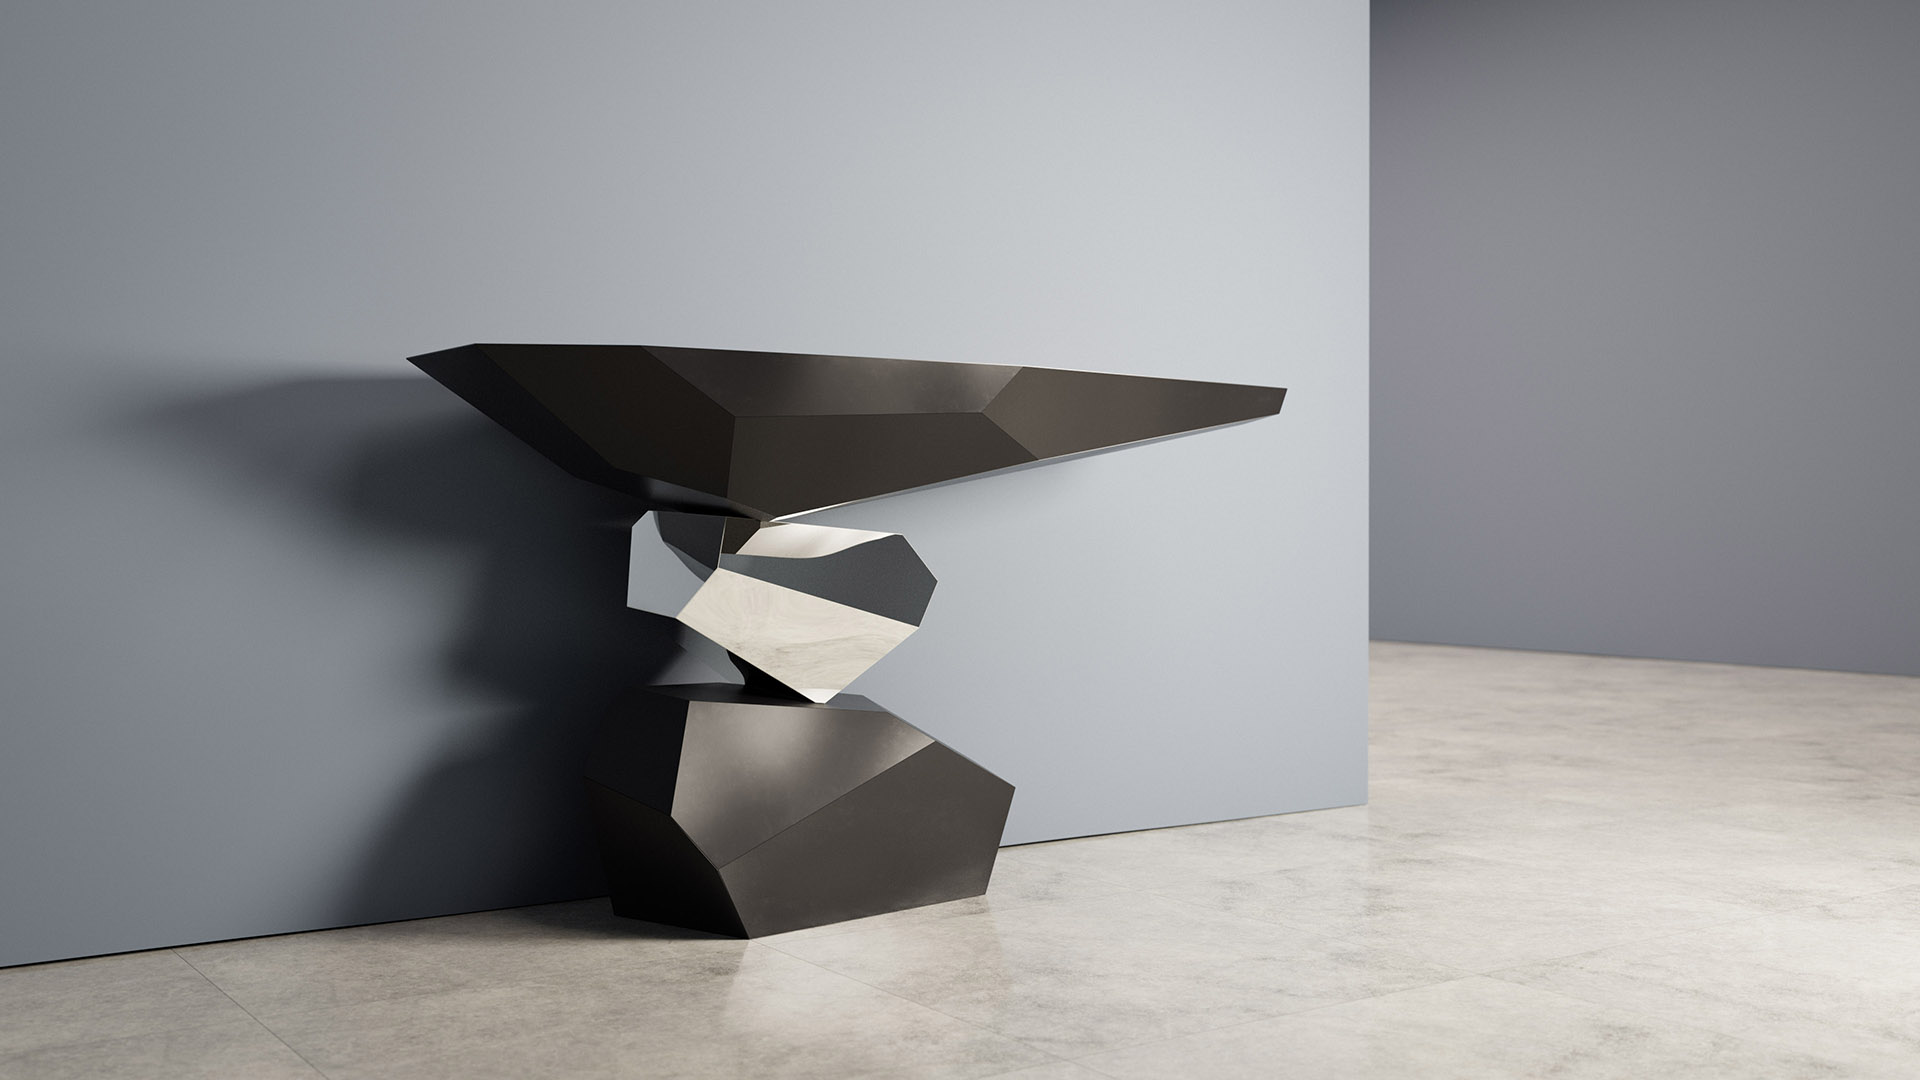 Console table inspired by Japanese rock gardens. Geometric shapes in balance